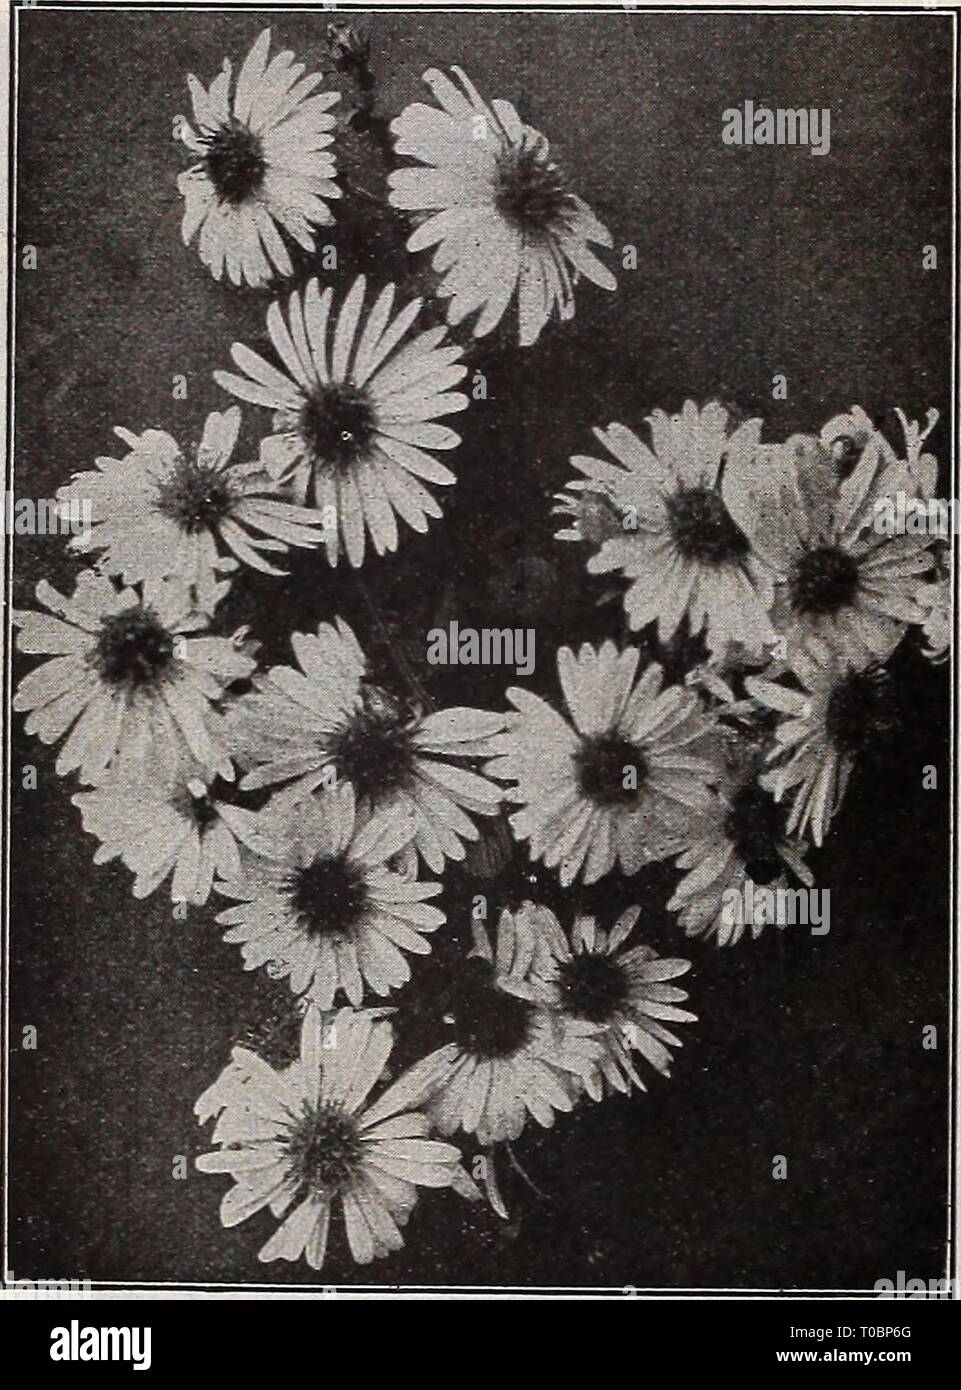 Dreer's garden book 1918 (1918) Dreer's garden book 1918 dreersgardenbook1918henr Year: 1918  182          qggjj   -J-U-U    New Hardy Aster Novi-BELgn Climax Dwarf Alpine Hardy Asters Summer-flowering Hardy Asters Are offered on page 181 PLANS OF HARDY BORDERS These are shown together with list of suitable plants in our Special Catalogue of Hardy Plants. Copies free on request. a#     K-- ' 'â¢''â tfr - ^M H-  BP^^^d -     i 0 I*-**- # ^*Â» Hardy Asters, or Michaelmas Daisies FALL-FLOWERING HARDY ASTERS (Michaelmas Daisies, or Starworts) These are among the showiest of our late-flowering hard Stock Photo